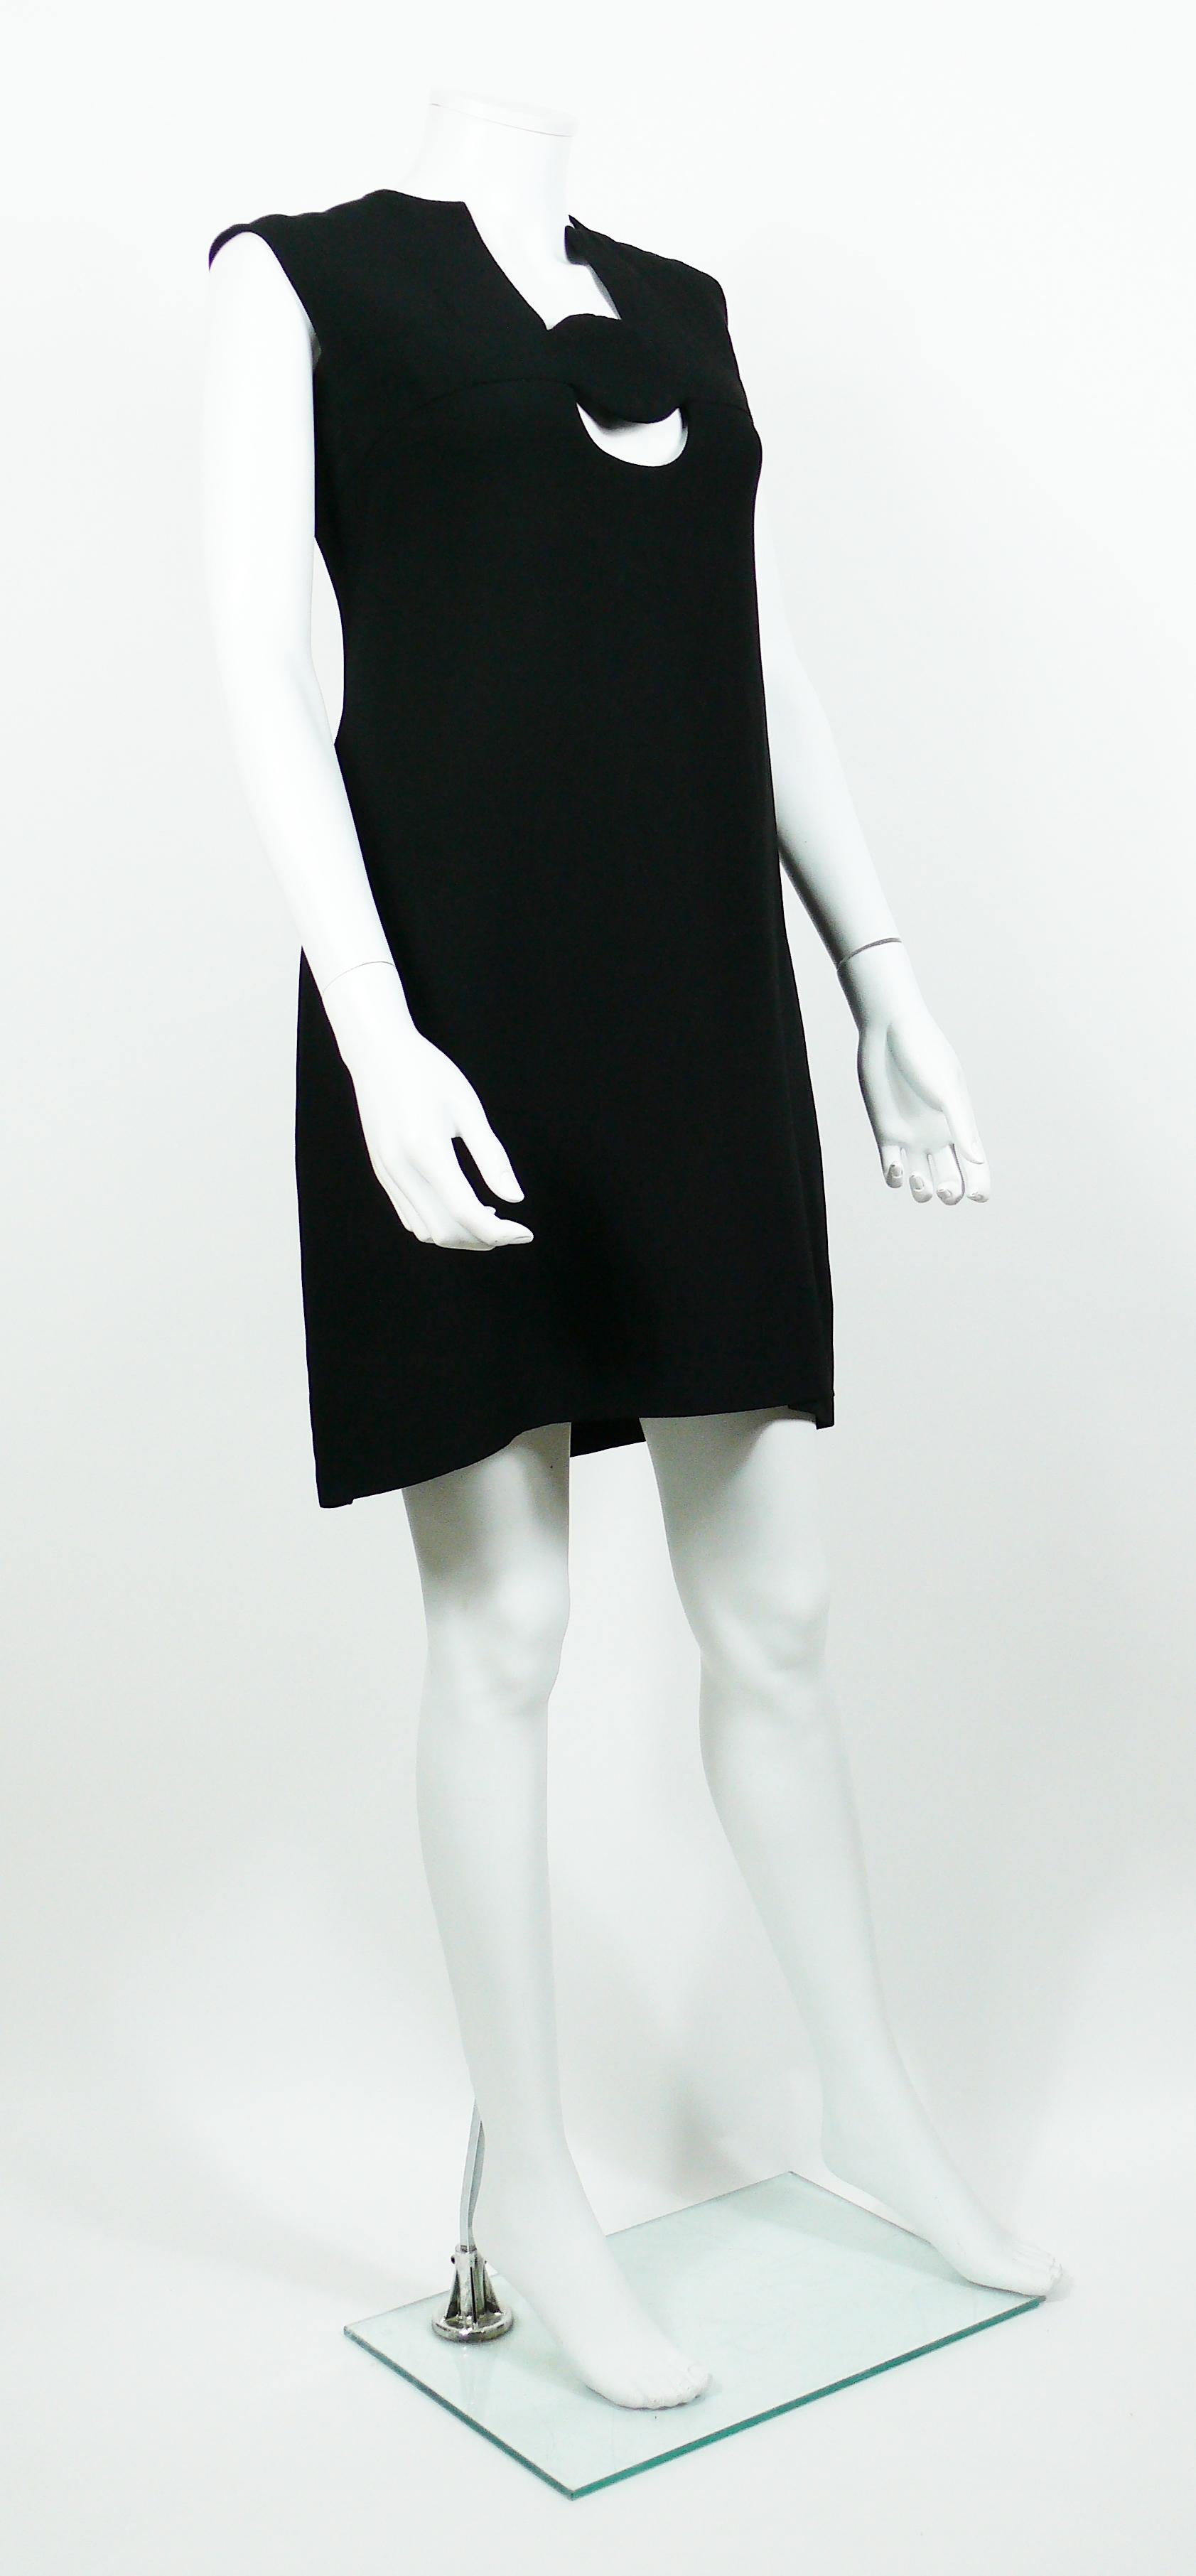 PIERRE CARDIN vintage Spage Age sleeveless dress featuring circle cut out on the chest.

Fully lined.
Back zip closure.

Label reads PIERRE CARDIN BOUTIQUE Paris.

Missing size tag.
Please double check measurements. 

Missing composition